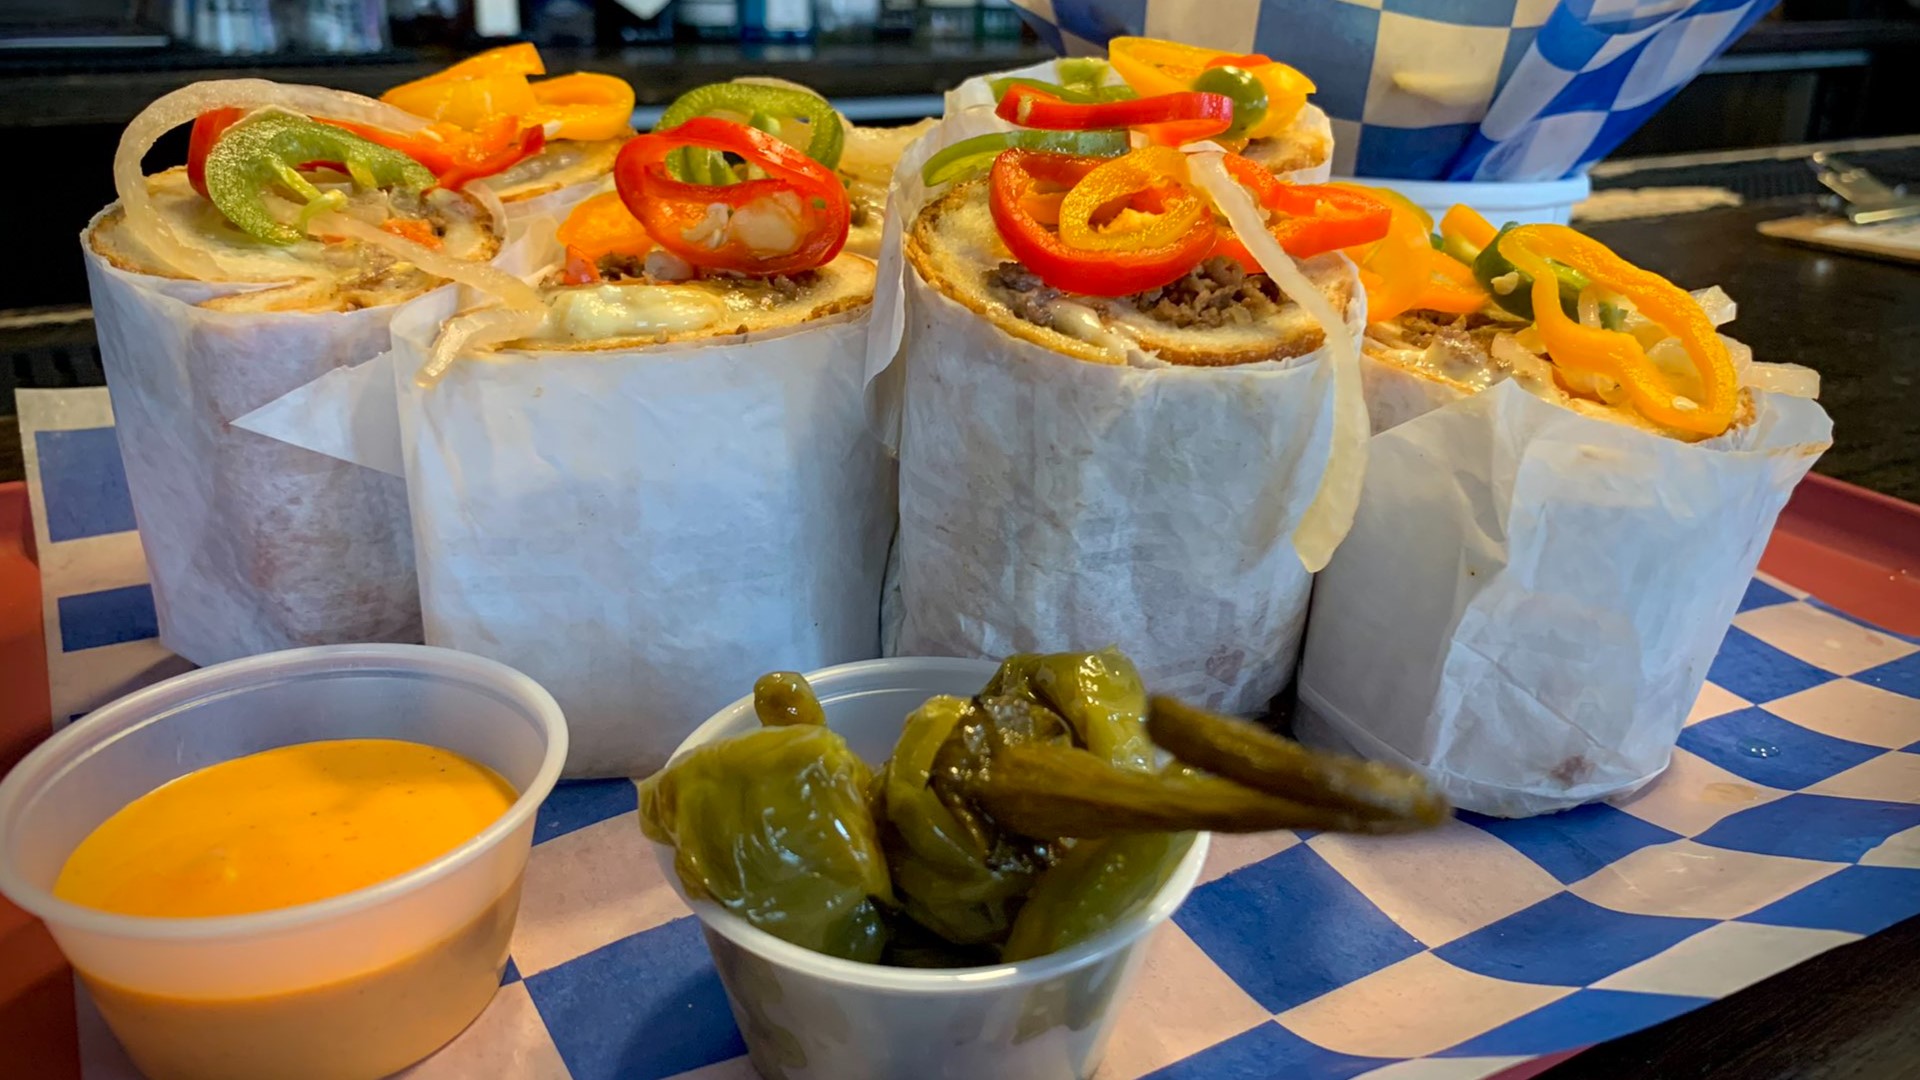 MilkBoy, a restaurant in Philadelphia, is putting their twist on a cheesesteak to celebrate the Phillies' World Series appearance.